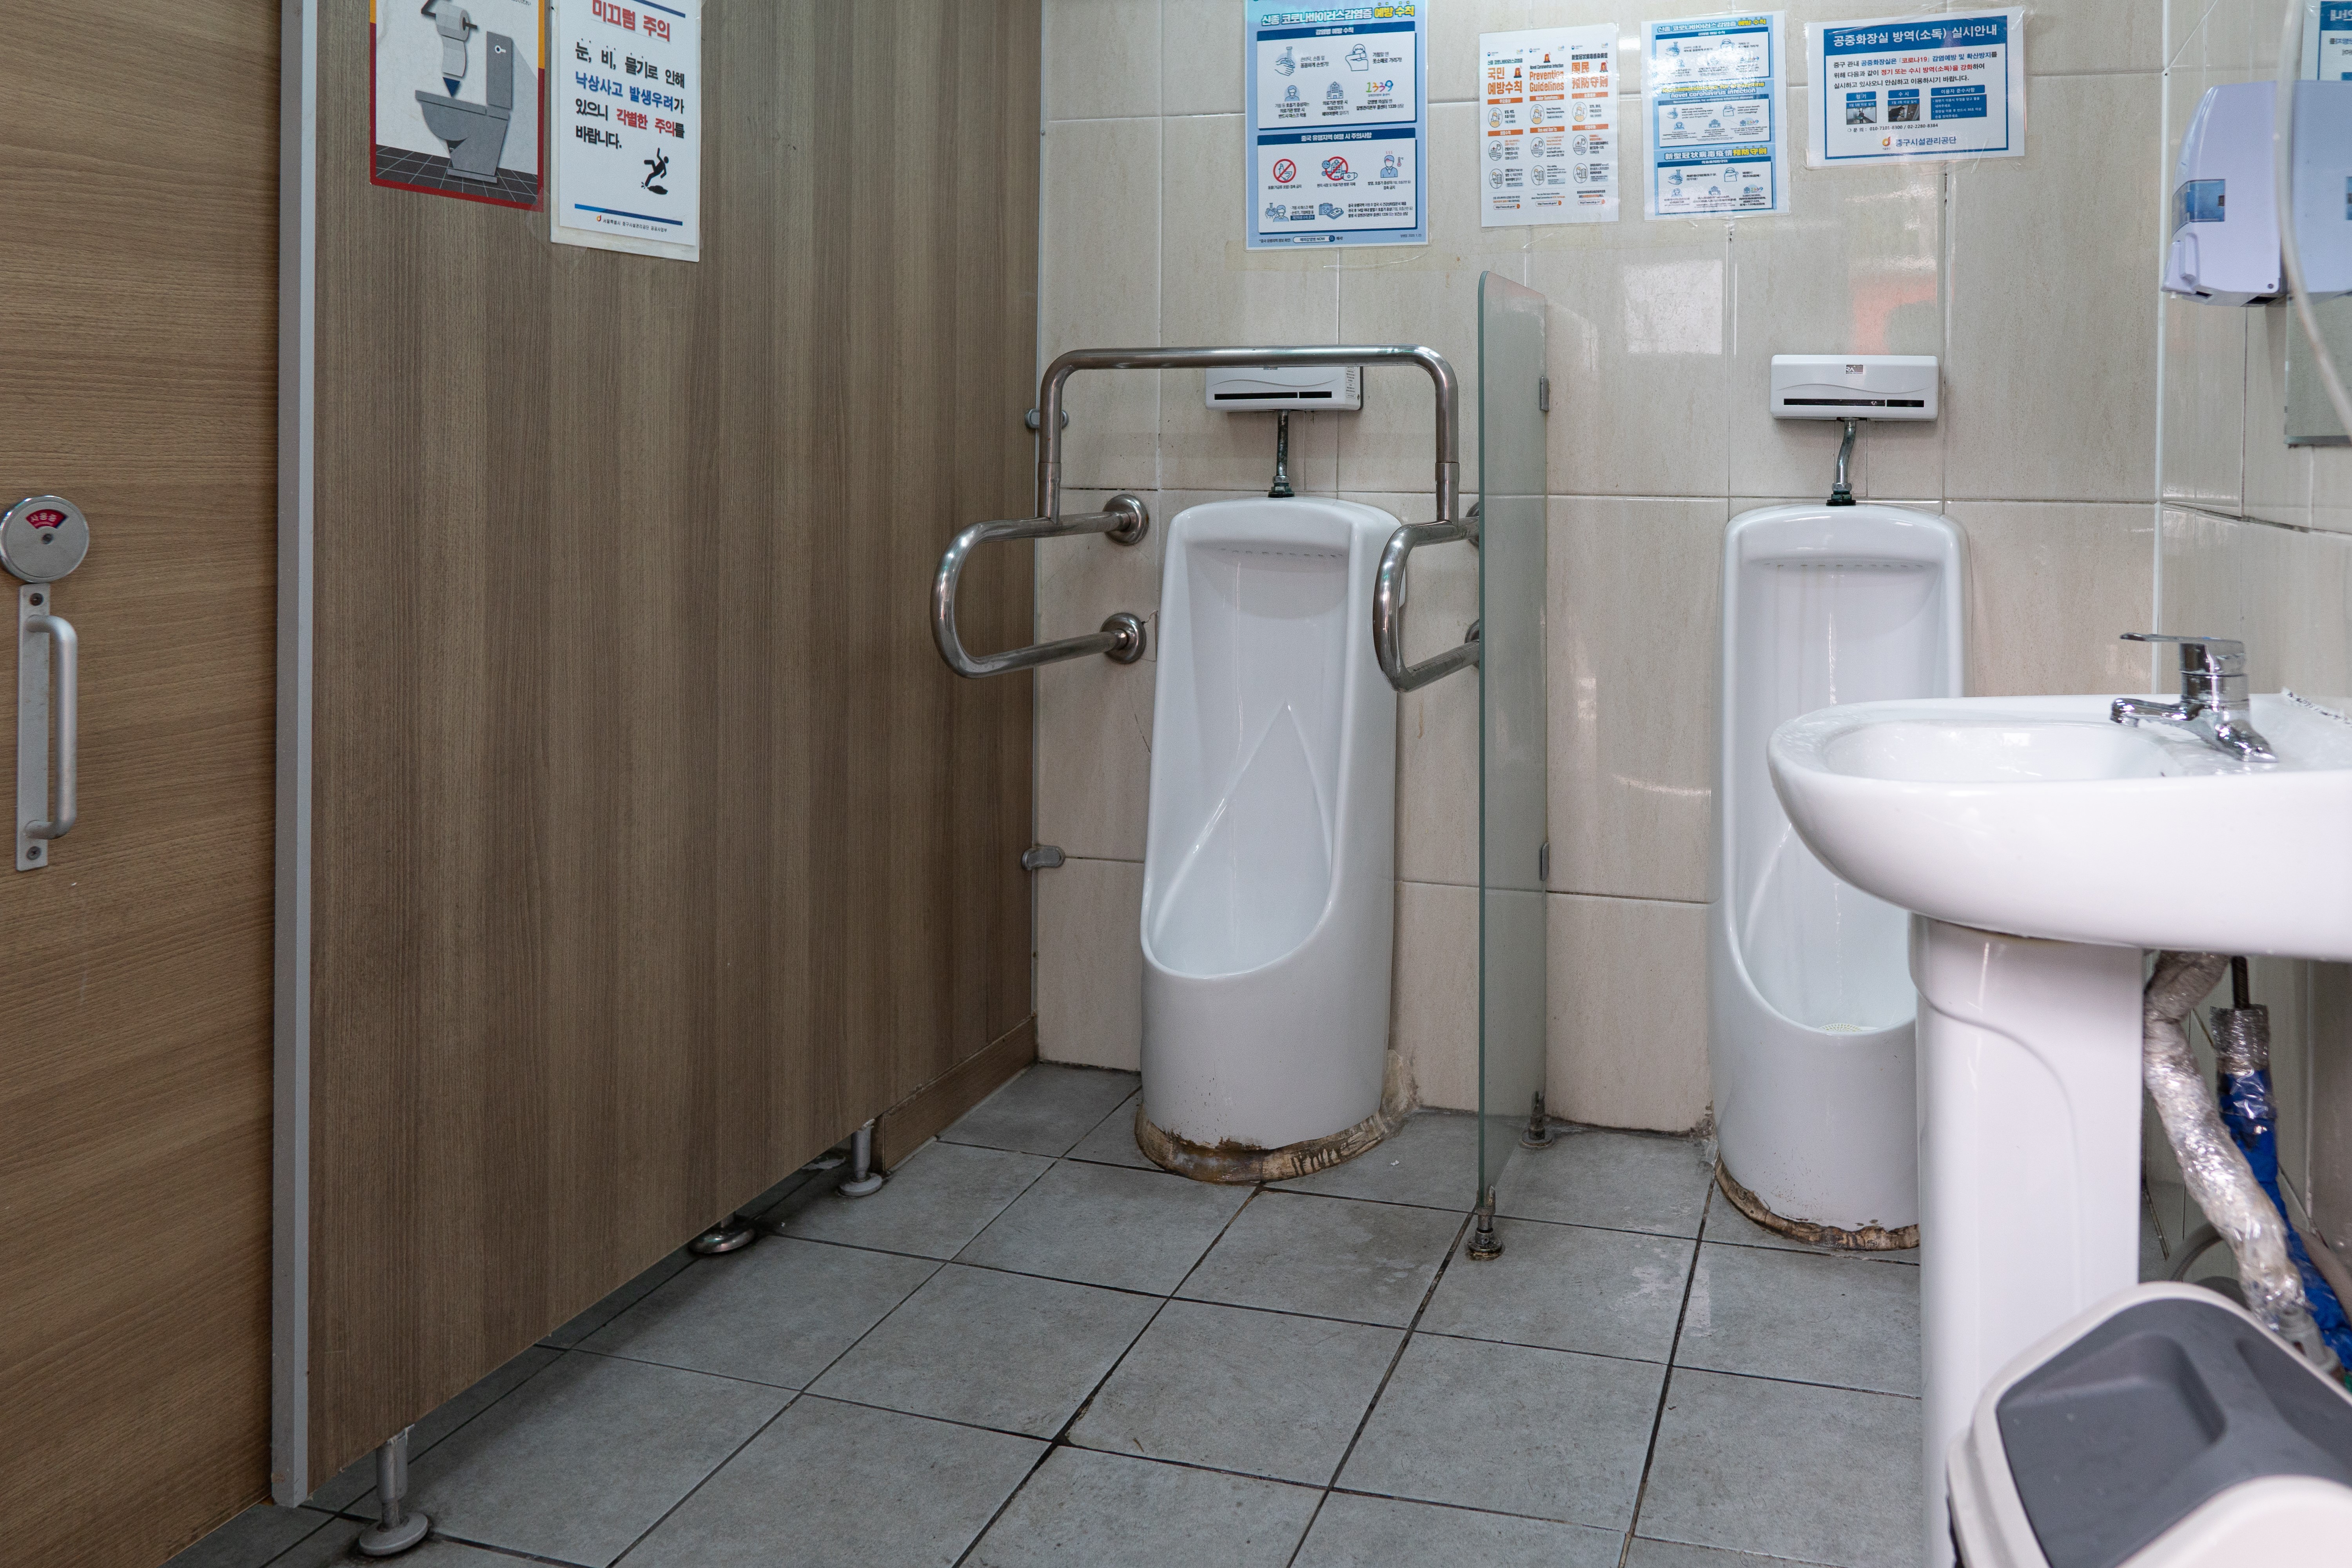 Restroom 0 : Toilets and urinals separate but not accessible by wheelchair users due to limited space